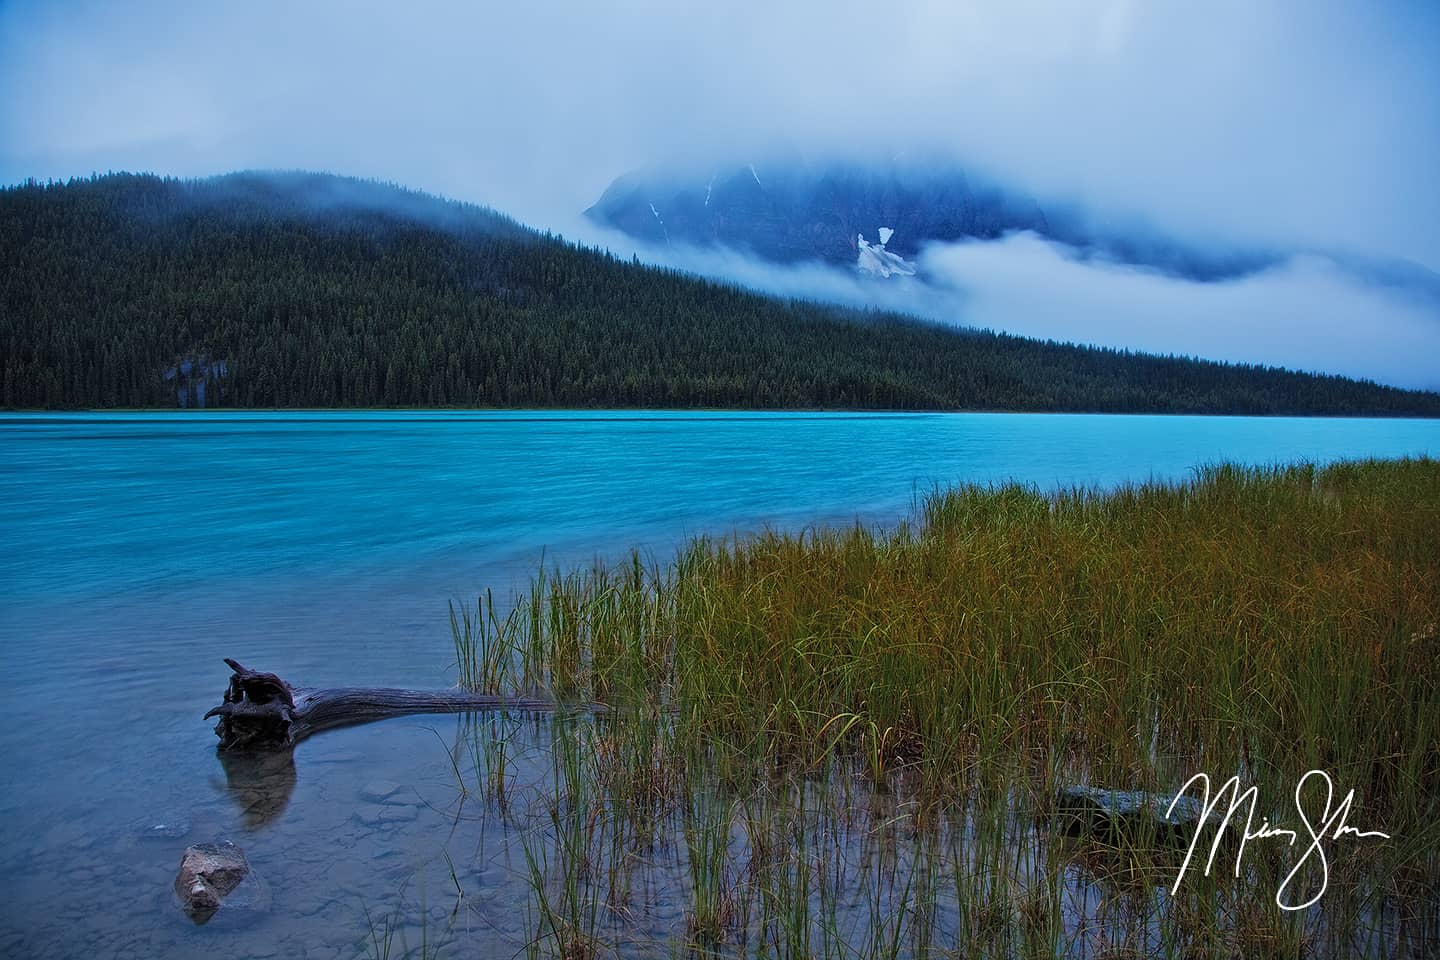 Misty Morning At Waterfowl Lake - Waterfowl Lake, Icefields Parkway, Banff National Park, Alberta, Canada